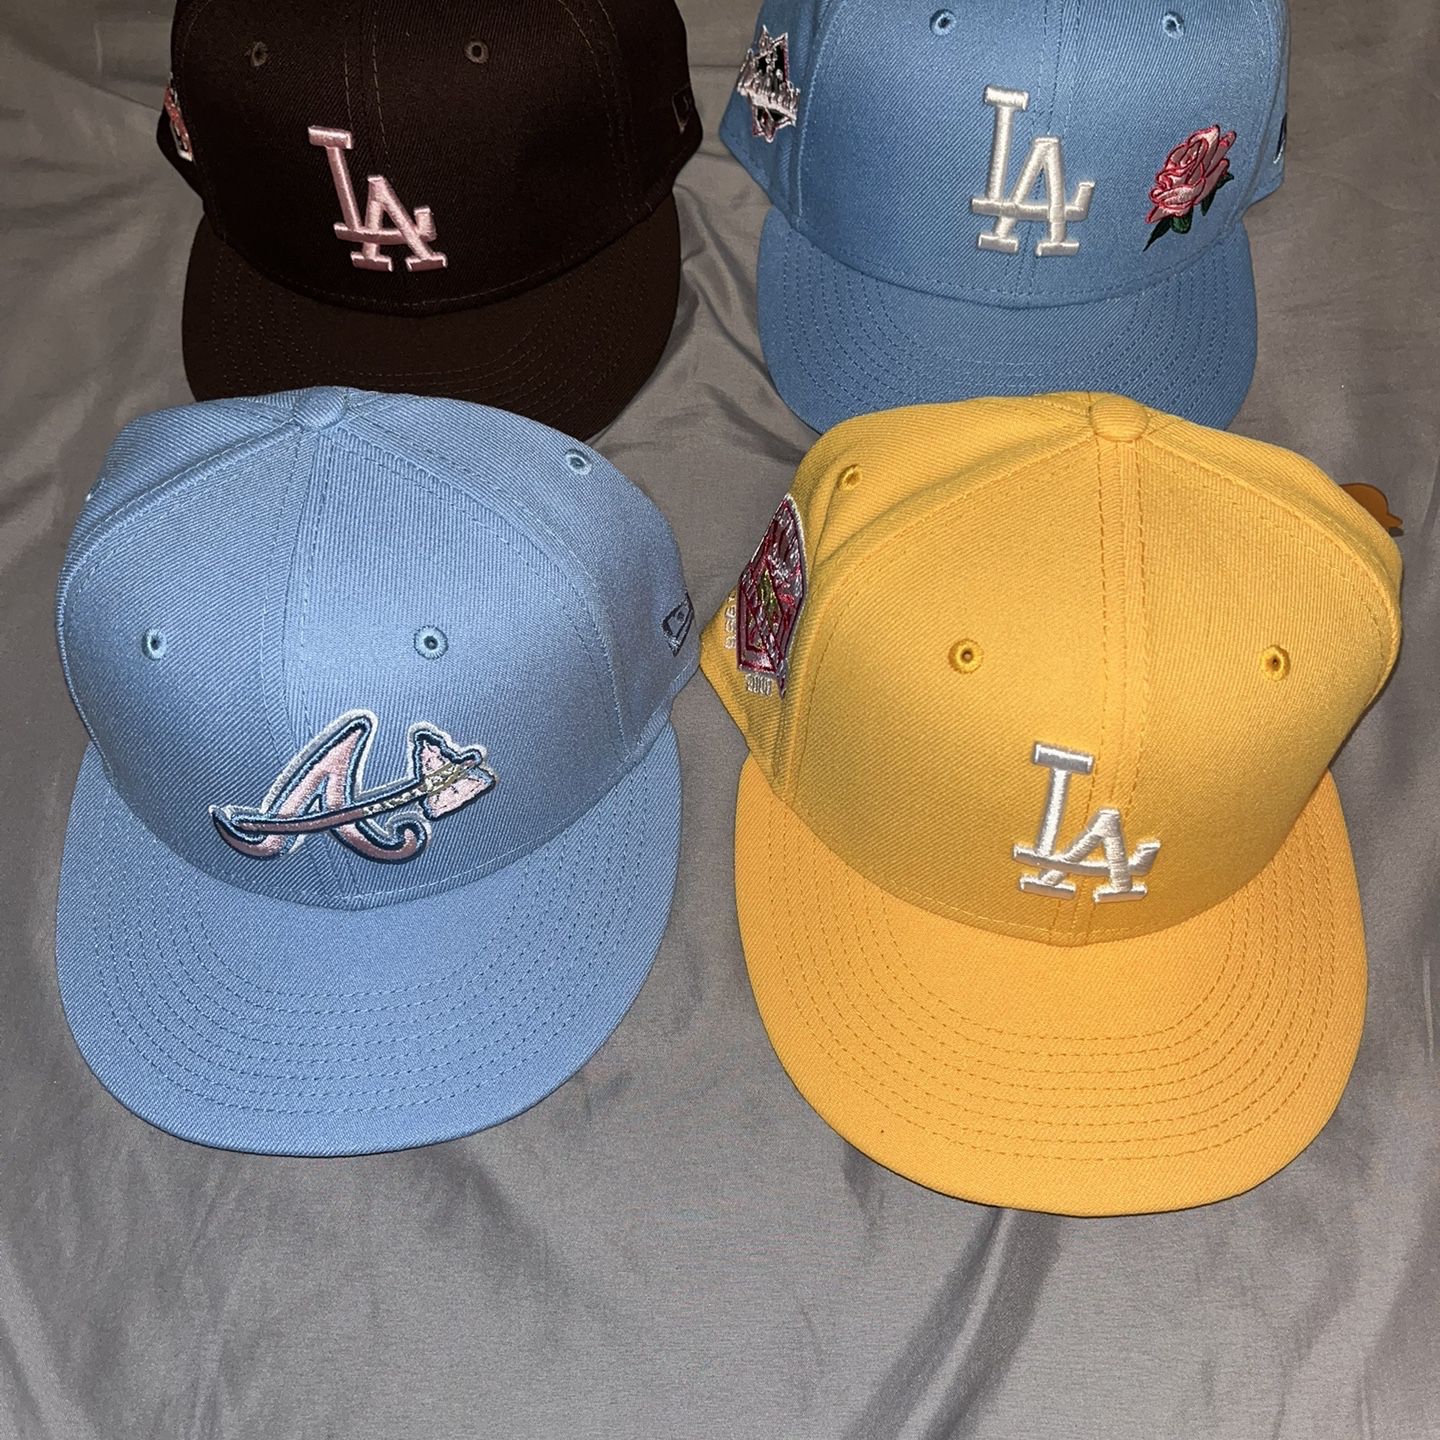 Hat Club Exclusive, LV Red Bottom Collection, Oakland A's, Size 7-5/8 for  Sale in Oakland, CA - OfferUp